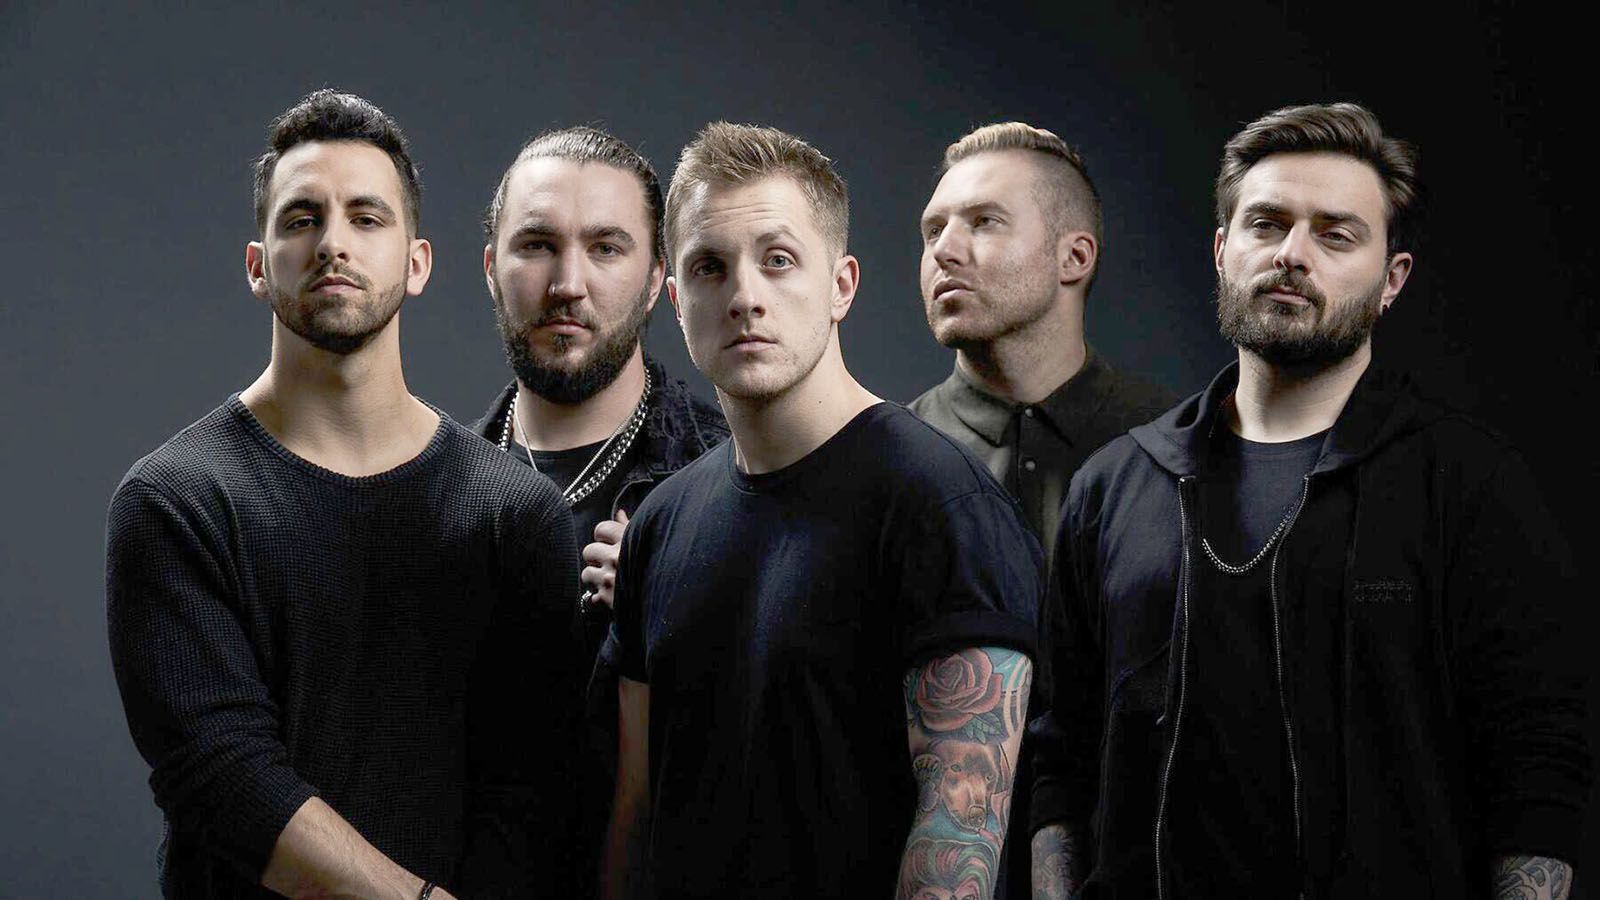 I Prevail will be at The Clyde on Oct. 7.